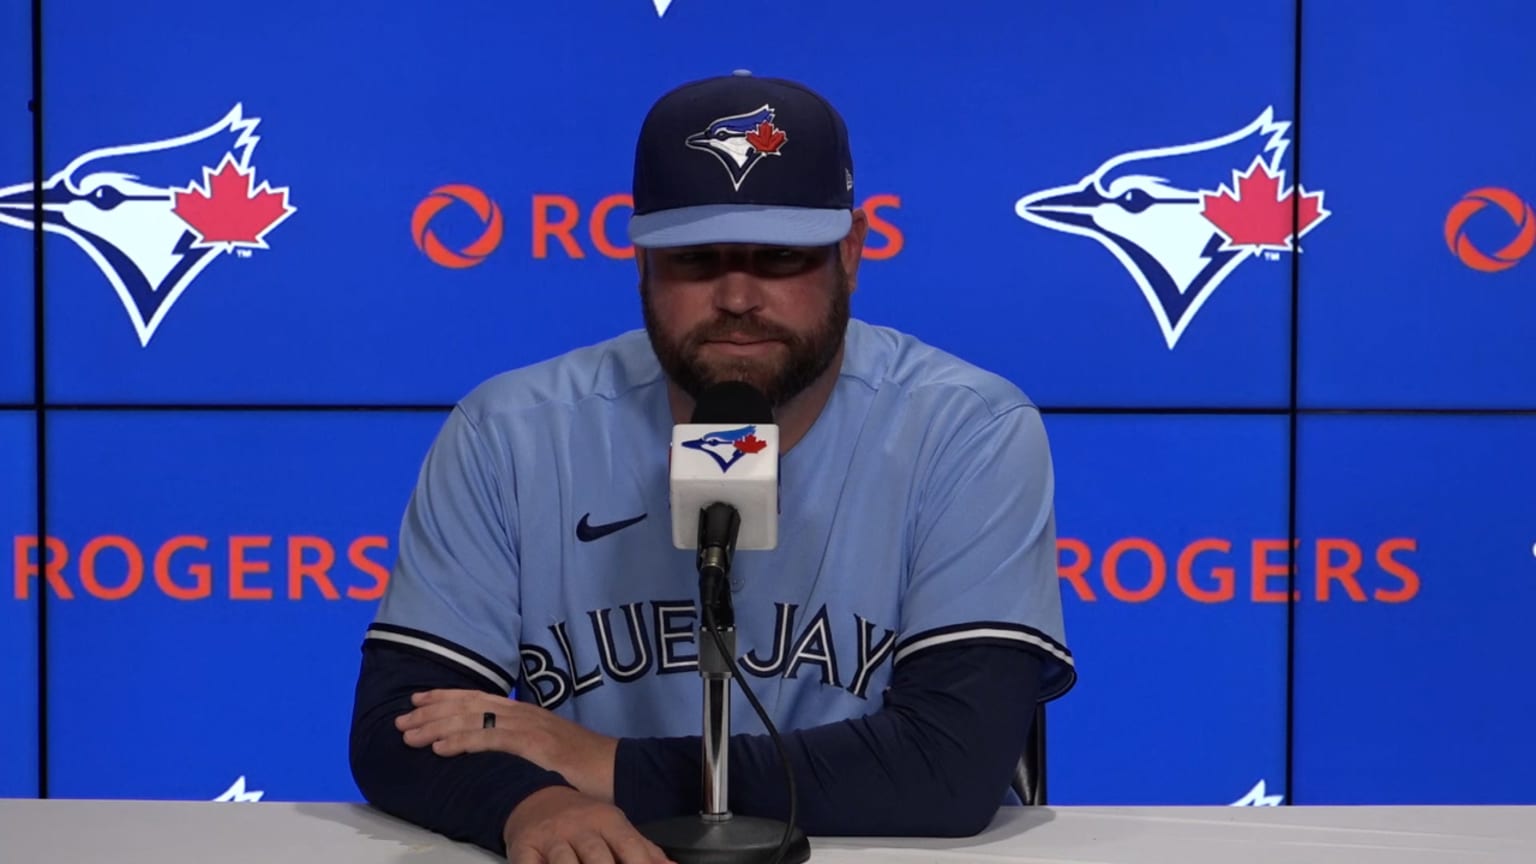 MLB Insider: John Schneider could be on hot seat if the Blue Jays